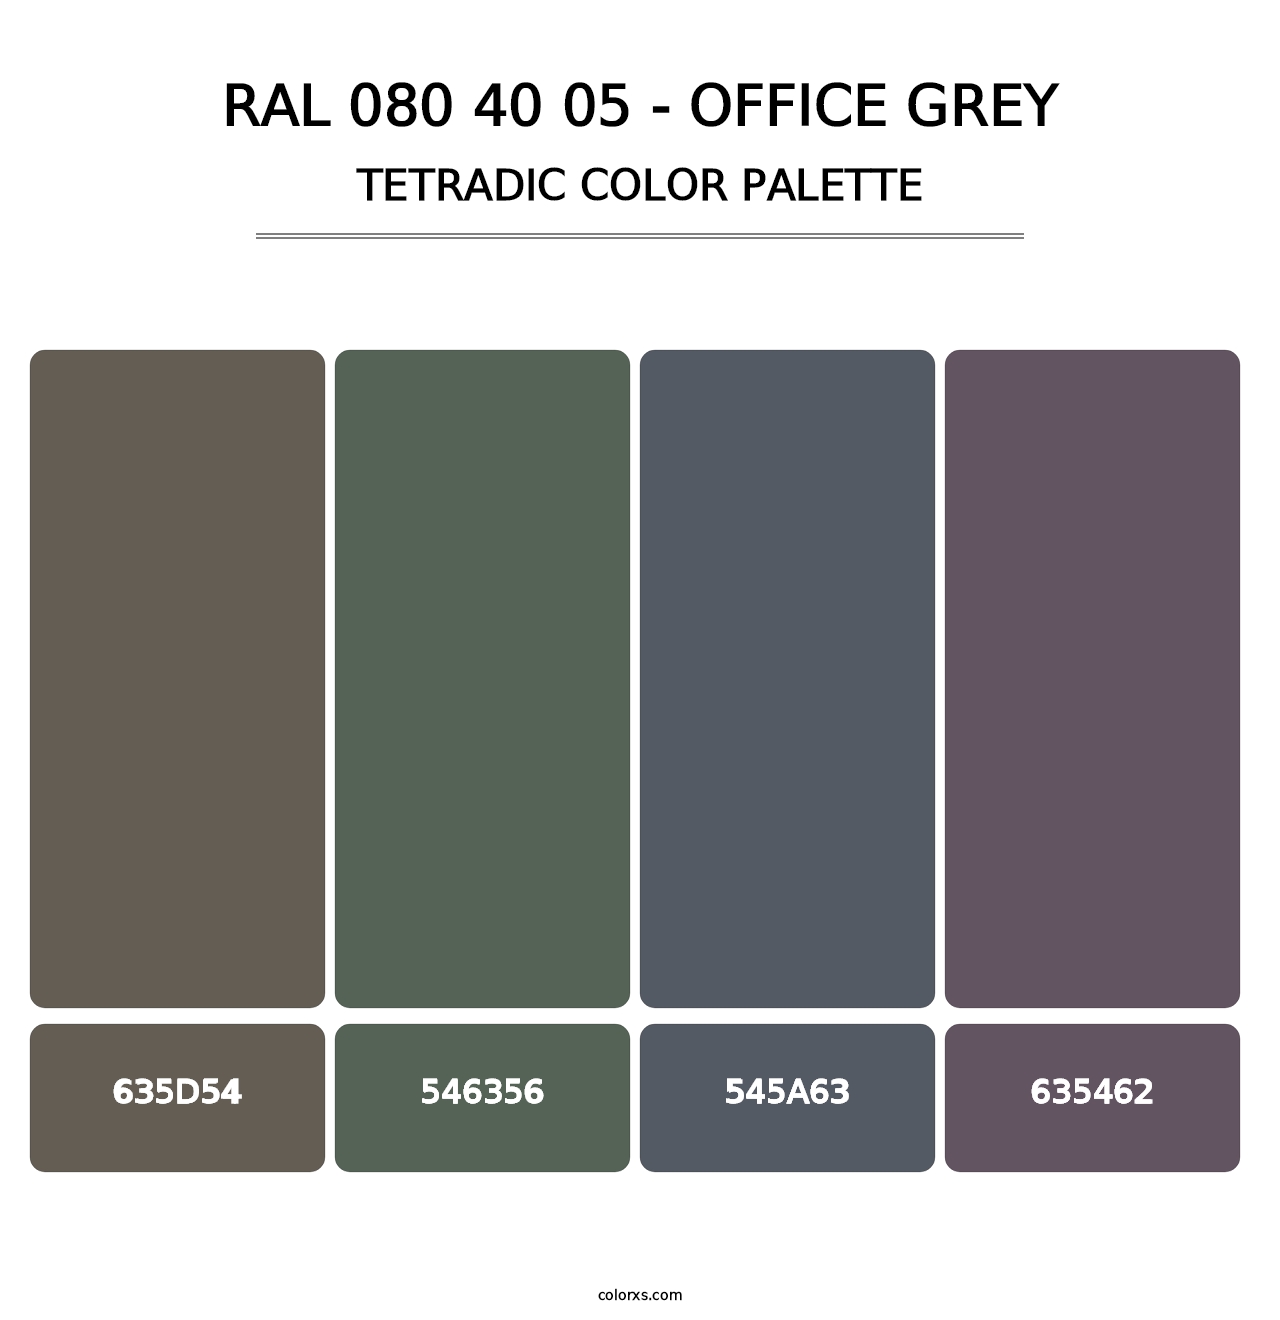 RAL 080 40 05 - Office Grey - Tetradic Color Palette